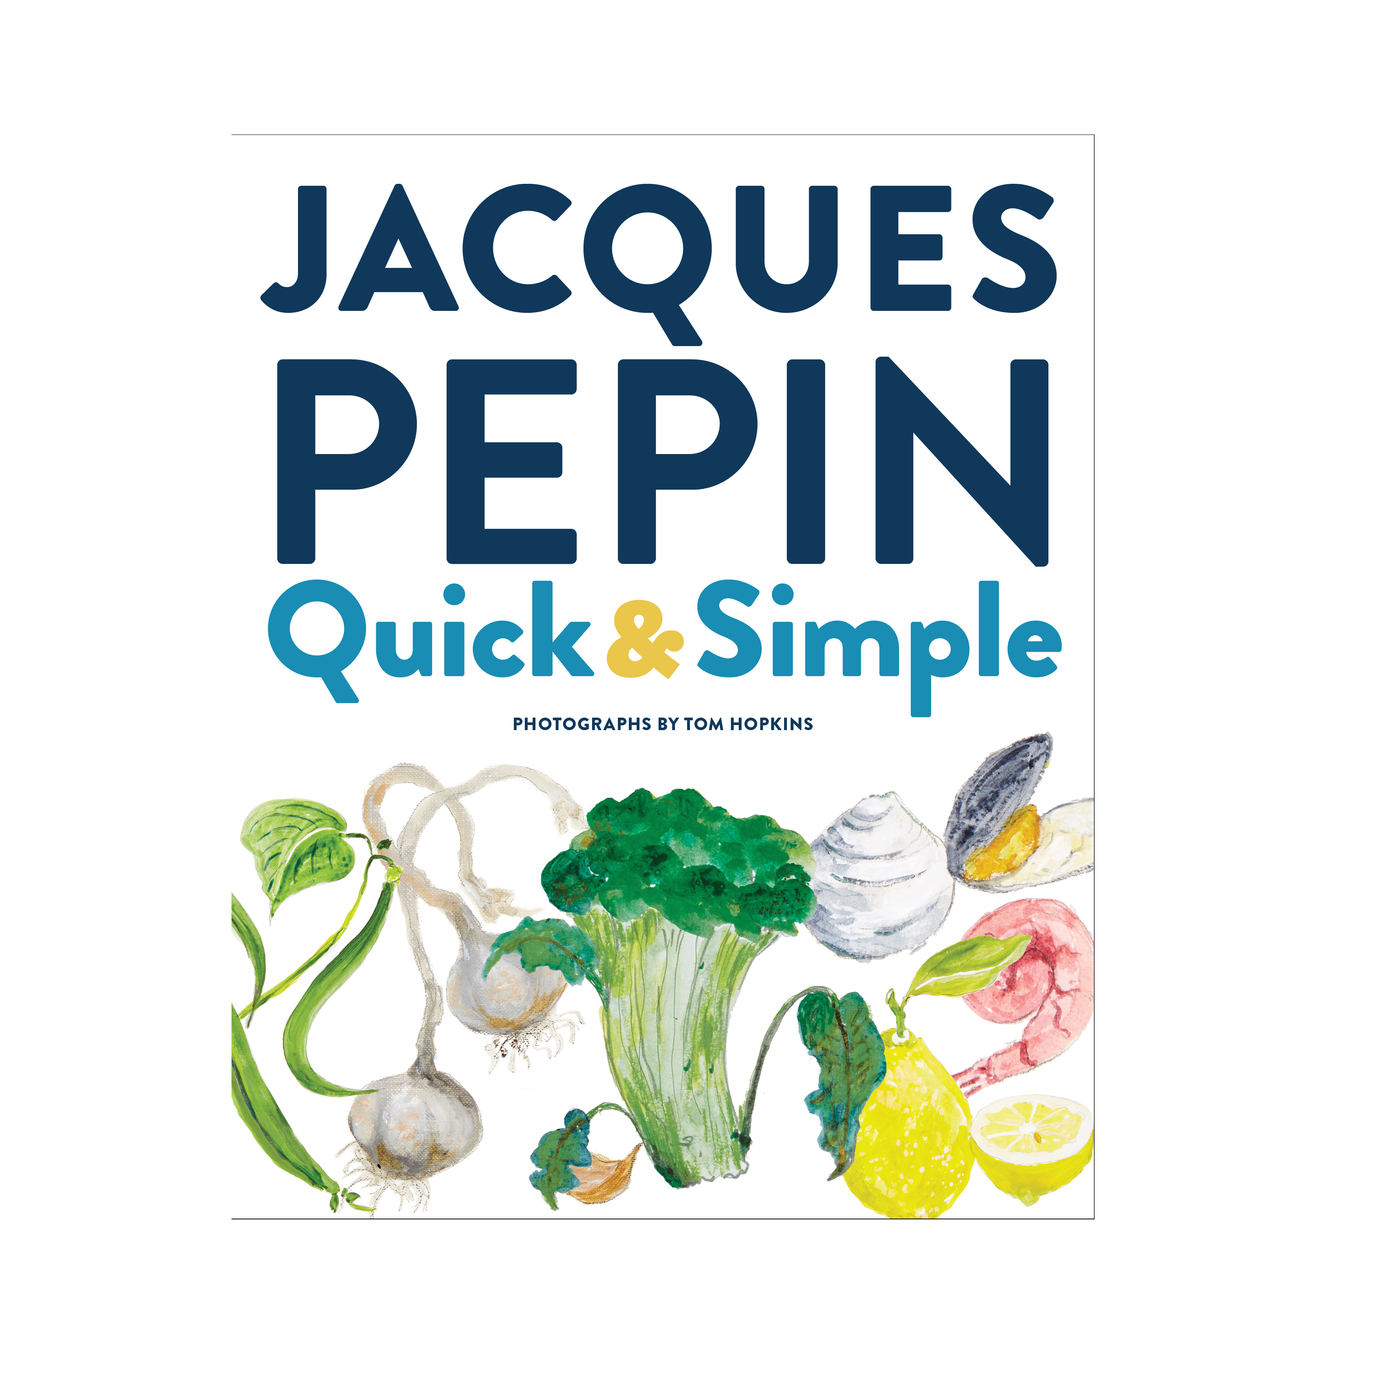 Quick & Simple by Jacques Pepin  | Newport Lamp And Shade | Located in Newport, RI